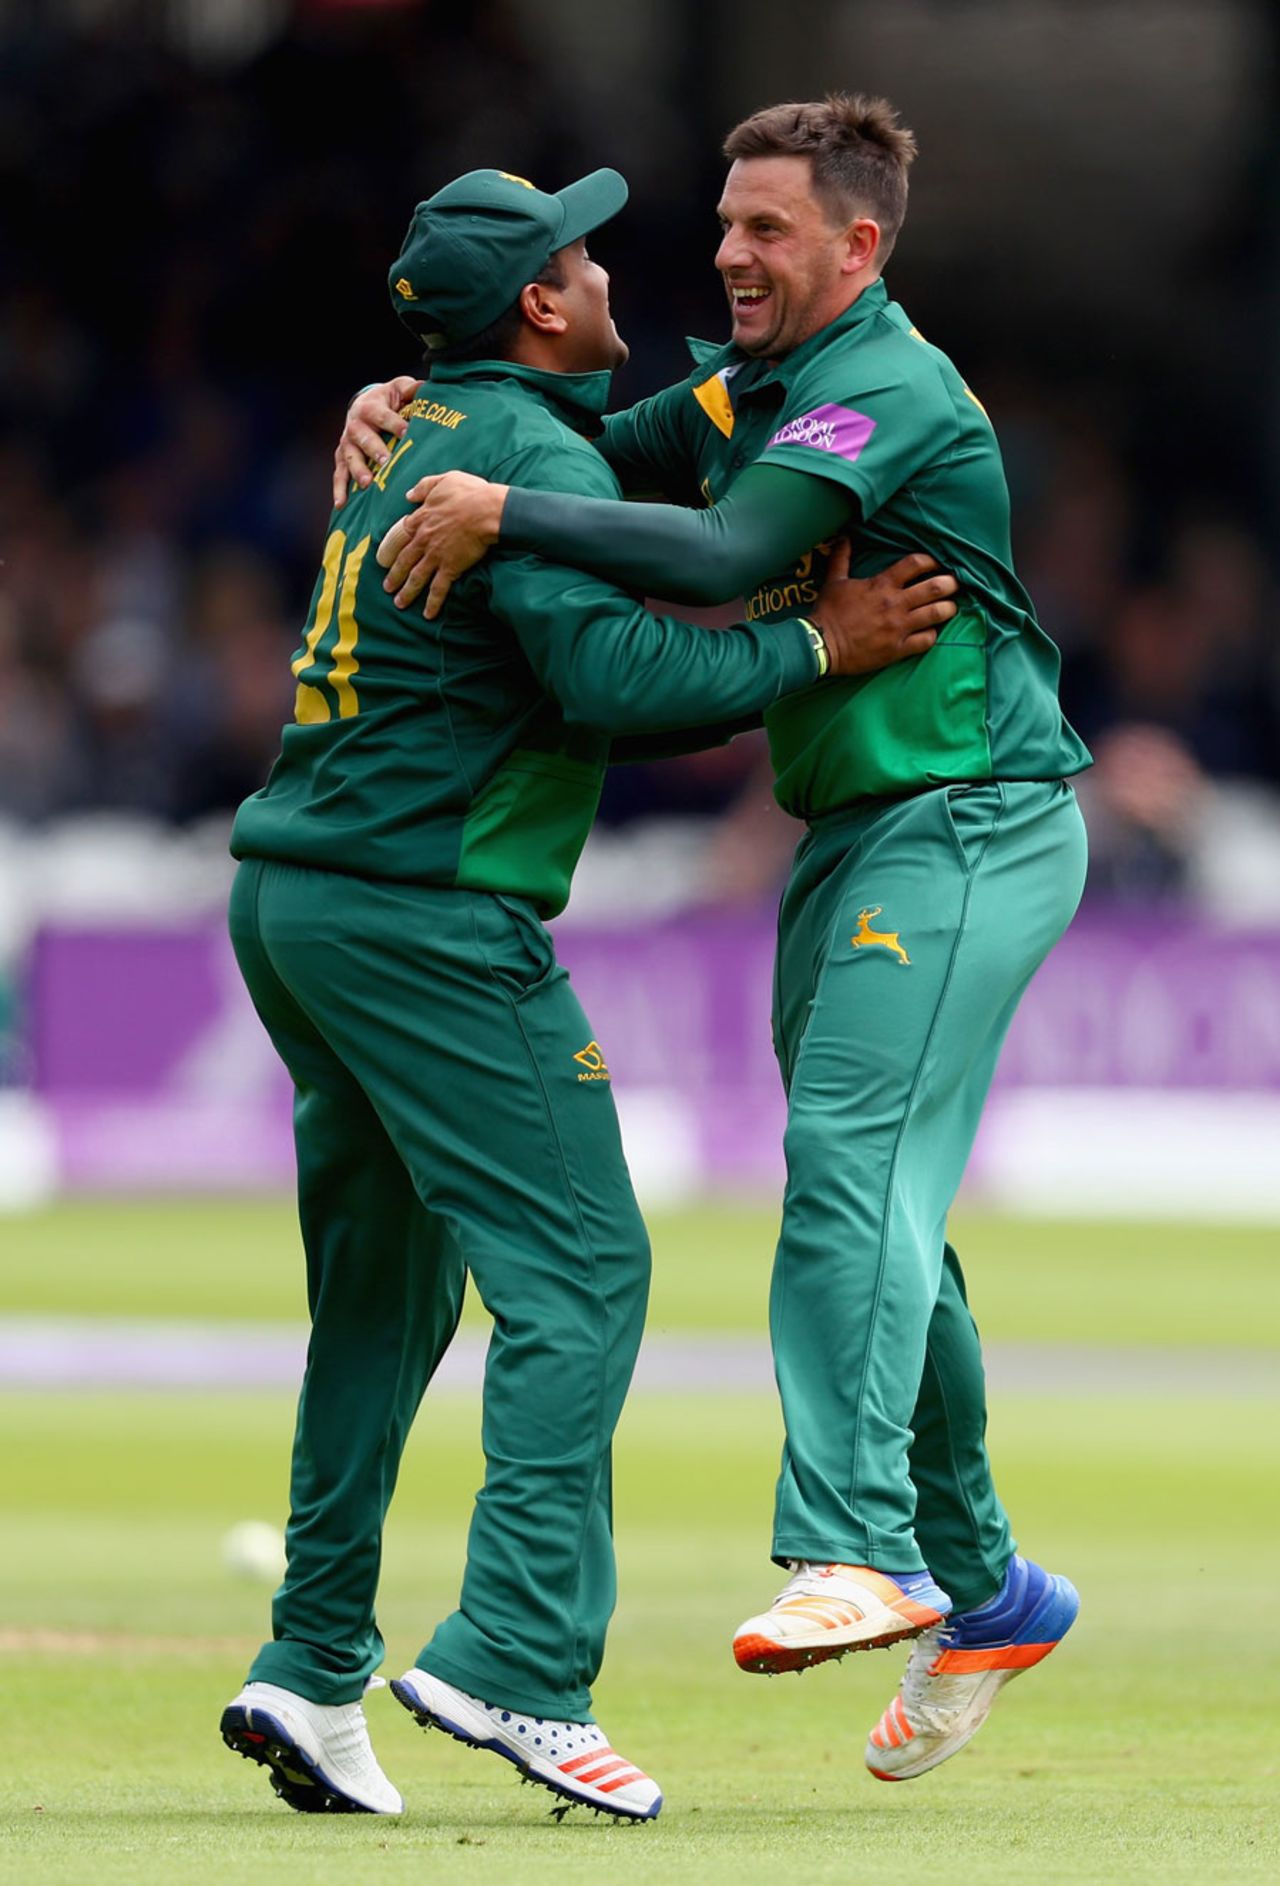 Samit Patel and Steven Mullaney shared five wickets, Nottinghamshire v Surrey, Royal London Cup final, Lord's, July 1, 2017